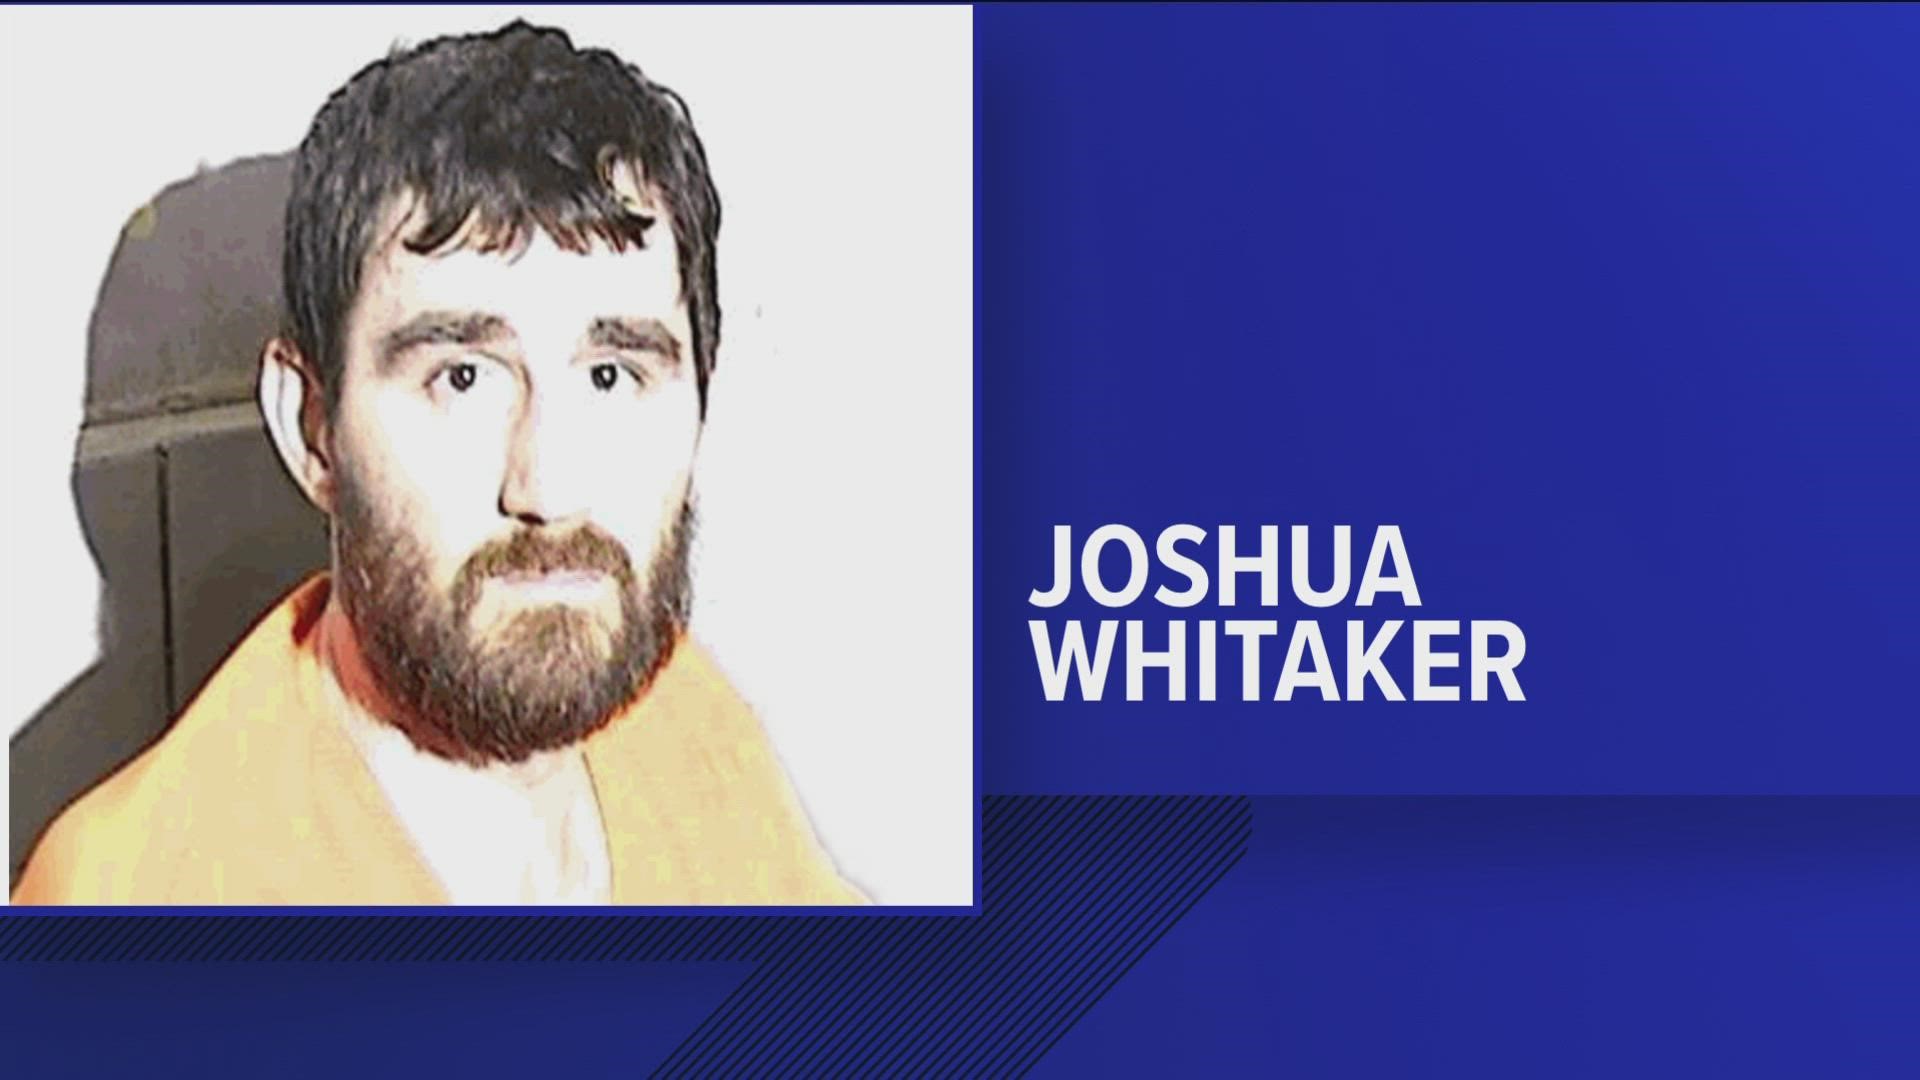 Joshua Whitaker was indicted in early August on four charges stemming from the crash that killed William Gergich Jr.